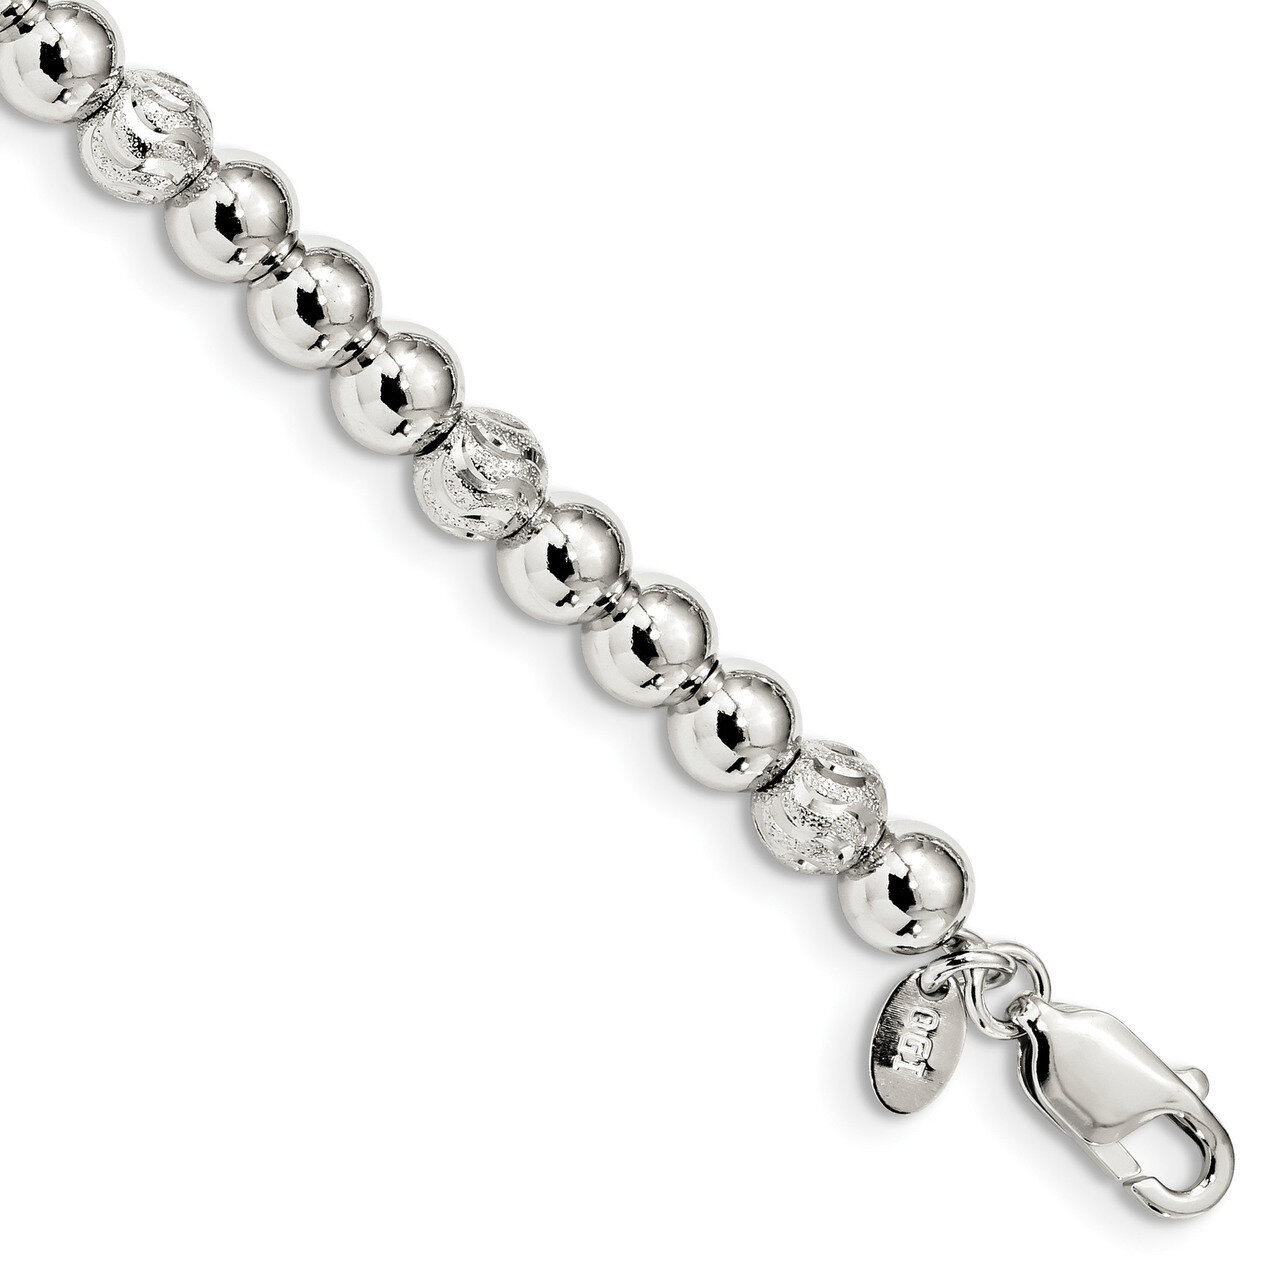 Beaded Bracelet 7.5 Inch Sterling Silver Polished and Diamond-cut QG3789-7.5